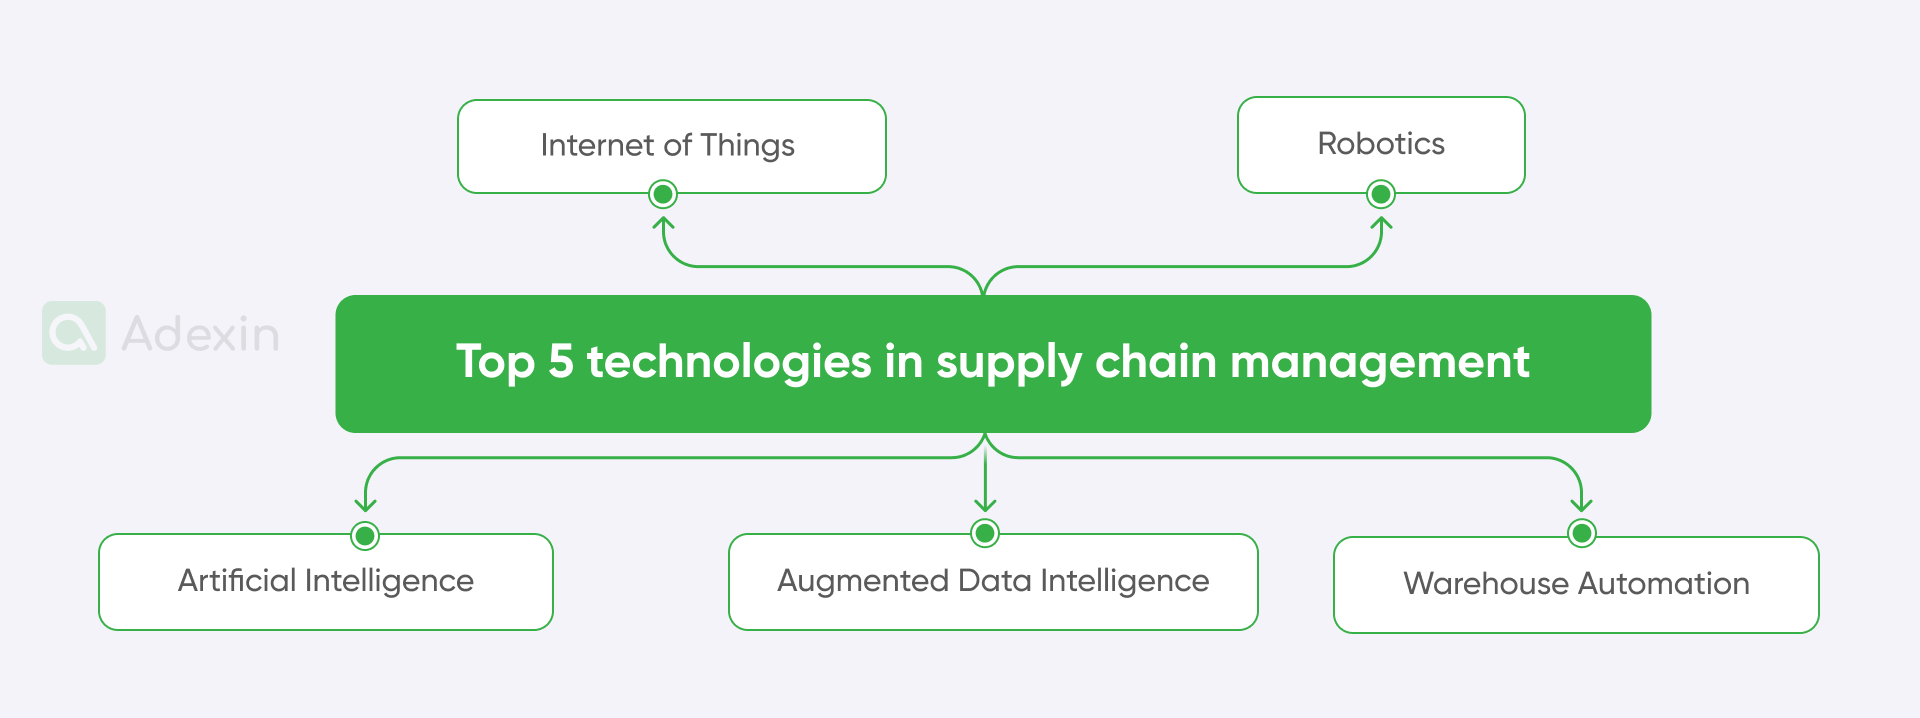 Technologies used in supply chain management